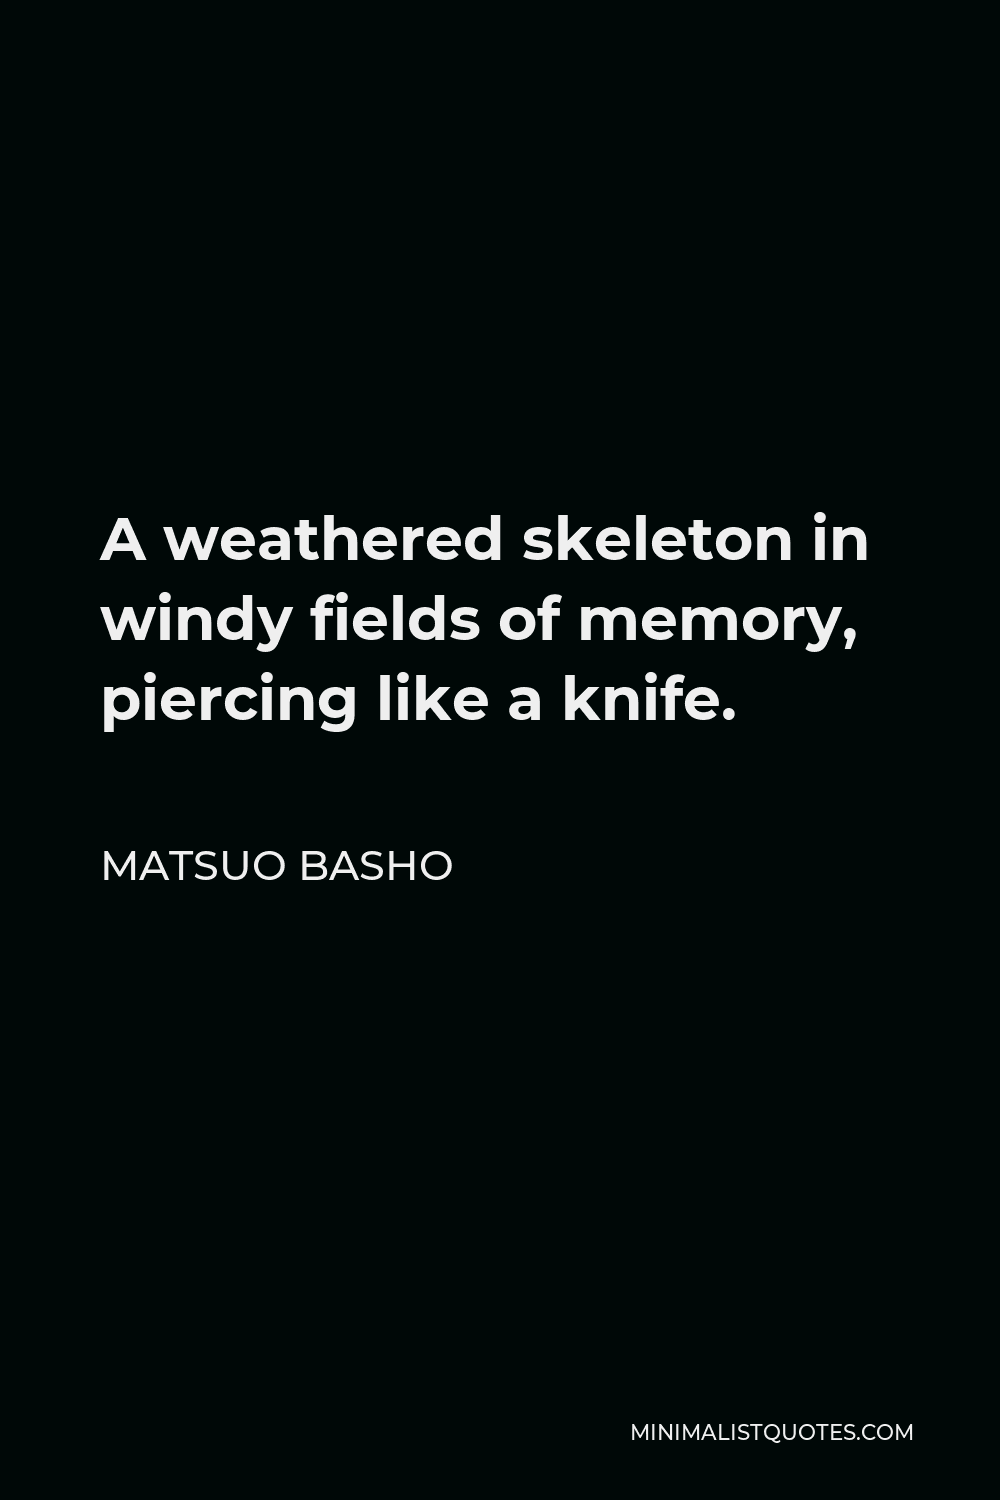 Matsuo Basho Quote - A weathered skeleton in windy fields of memory, piercing like a knife.